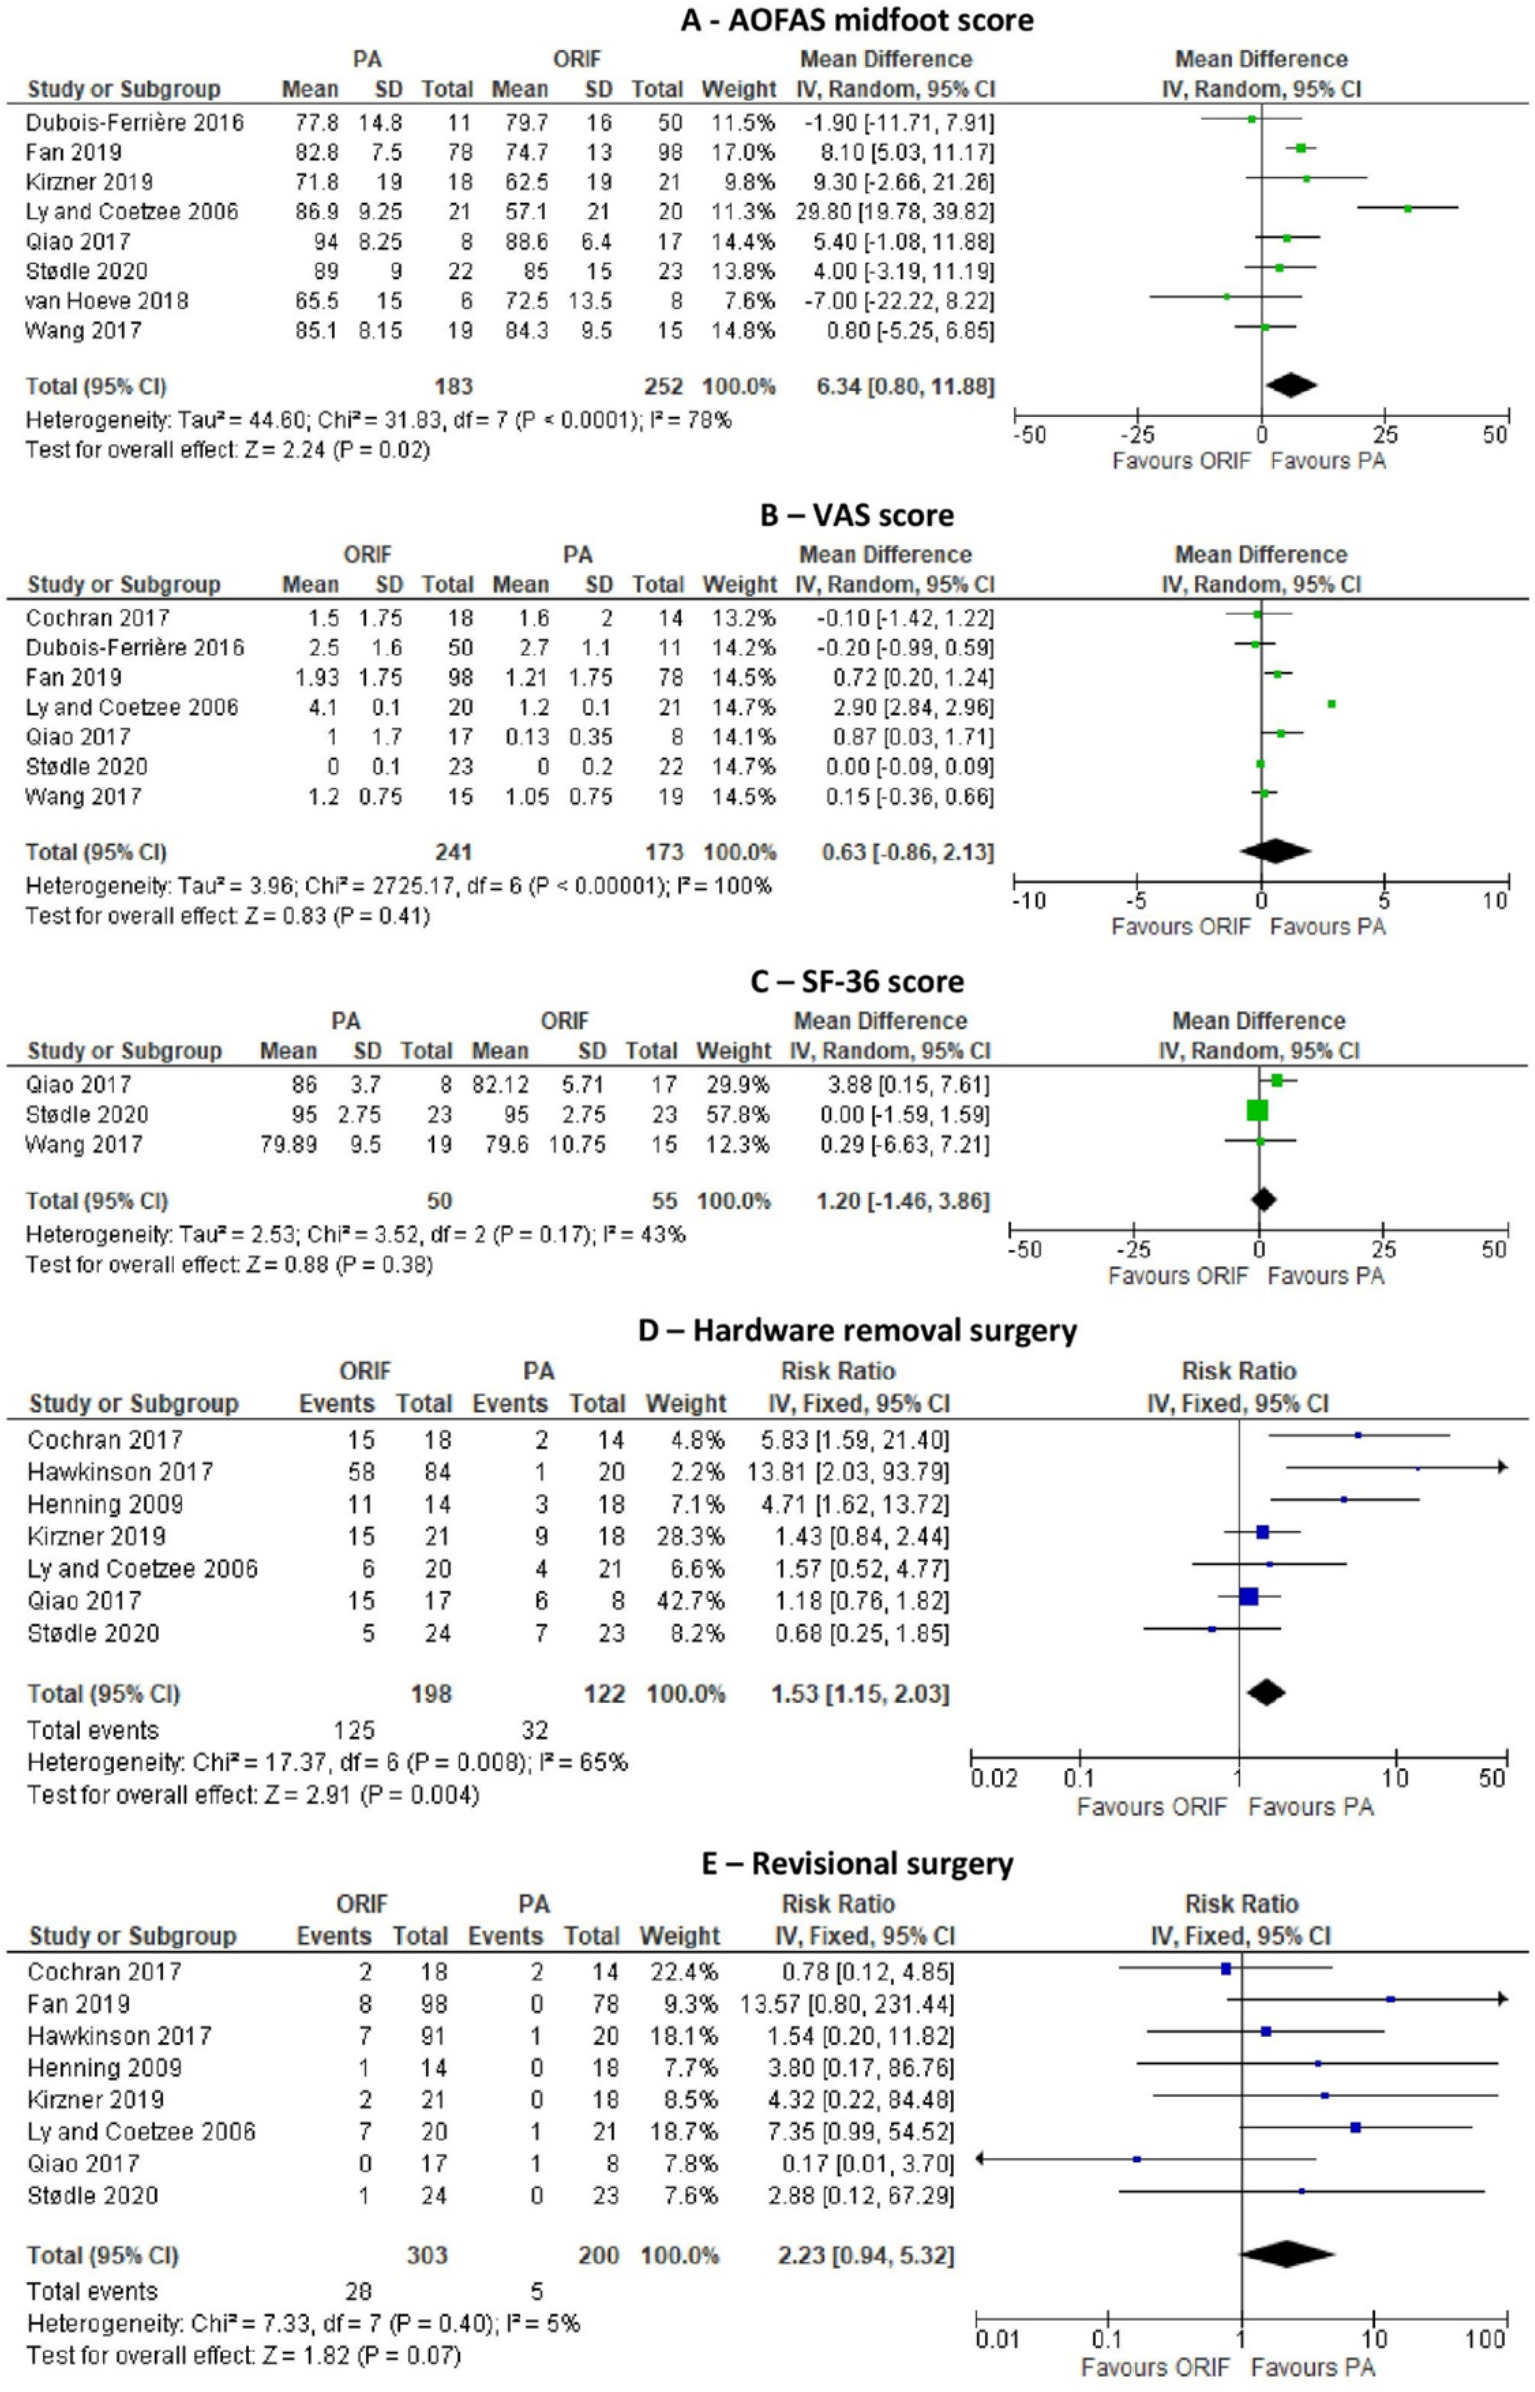 Fig. 1 
            Meta-analysis of comparative studies. AOFAS, American Orthopedic Foot and Ankle Society; CI, confidence interval; IV, inverse variance; ORIF, open reduction and internal fixation; PA, primary arthrodesis; SD, standard deviation; SF-36, 36-Item Short-Form Health Survey questionnaire; VAS, visual analogue scale.
          